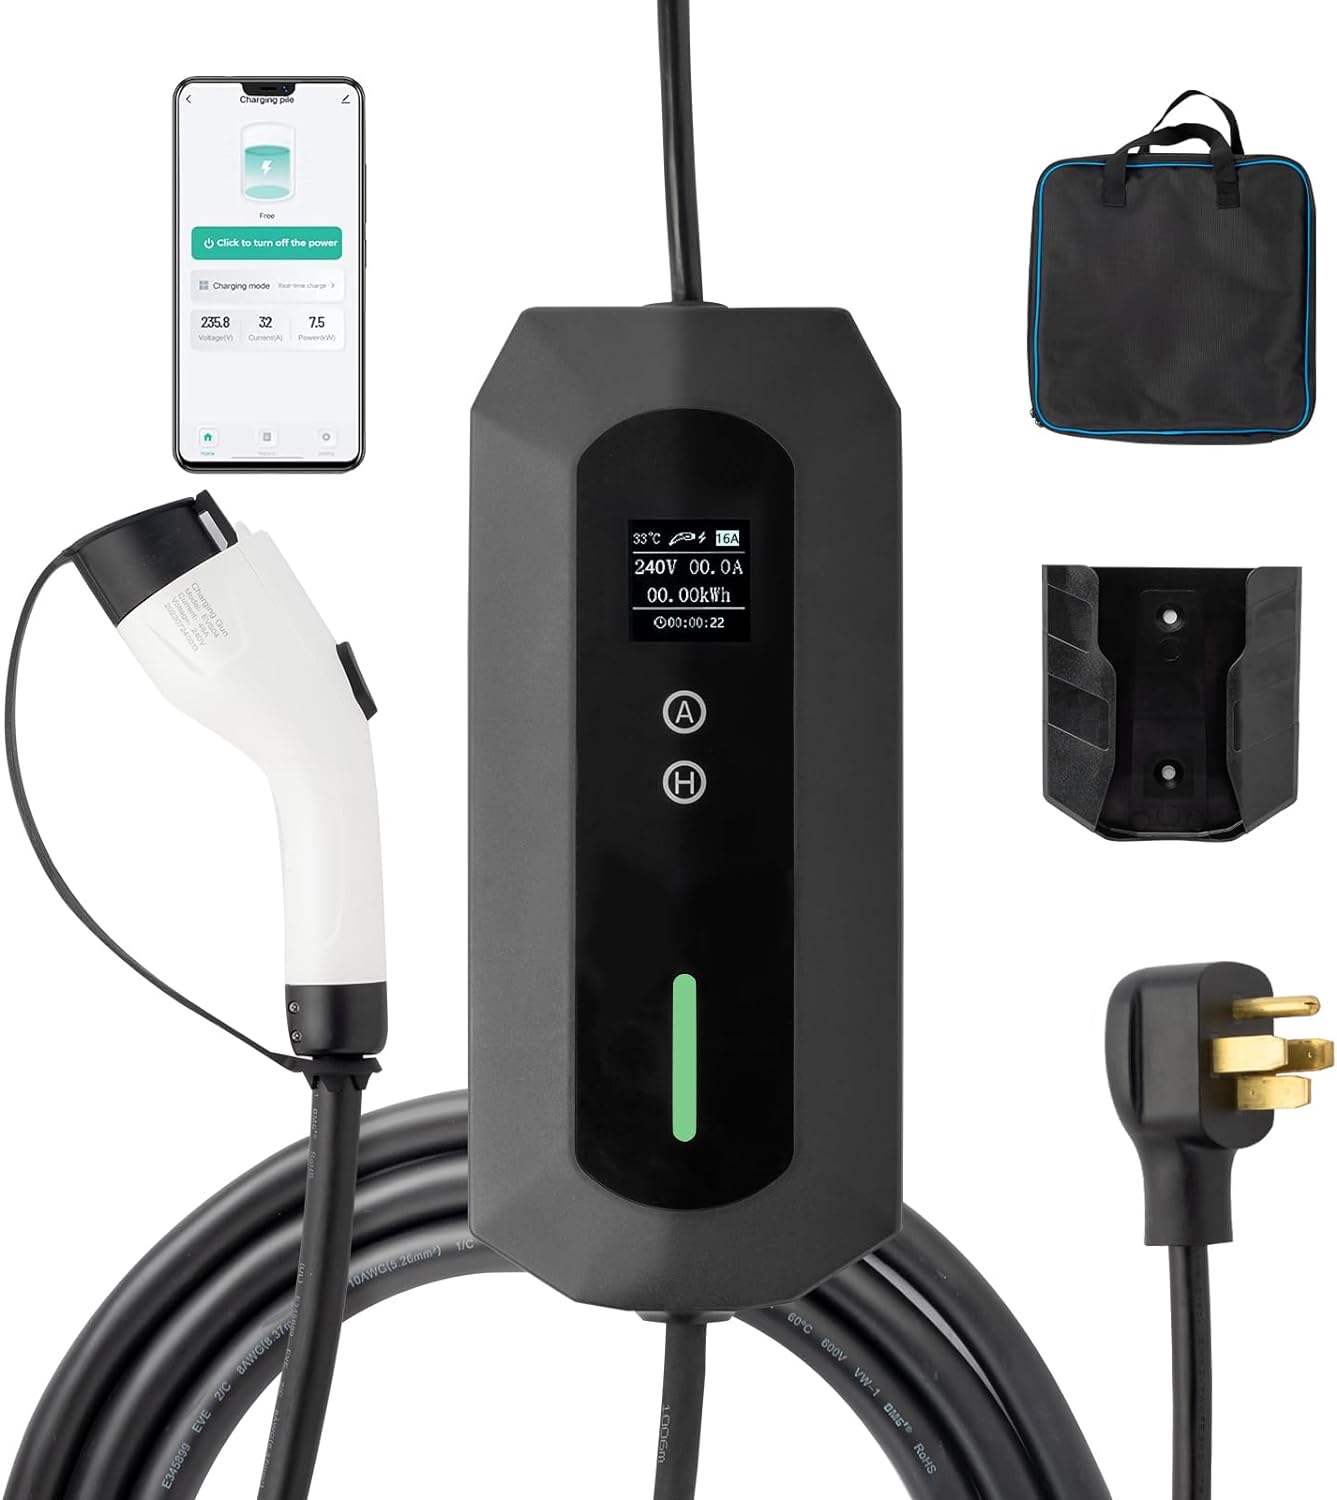 Winado Level 2 EV Charger, 32A 25FT Portable Car Charger w/Smart APP Control & Adjustable Current, Adapter Electric Vehicle Charging Station with NEMA 14-50 Plugs for Home $74.99